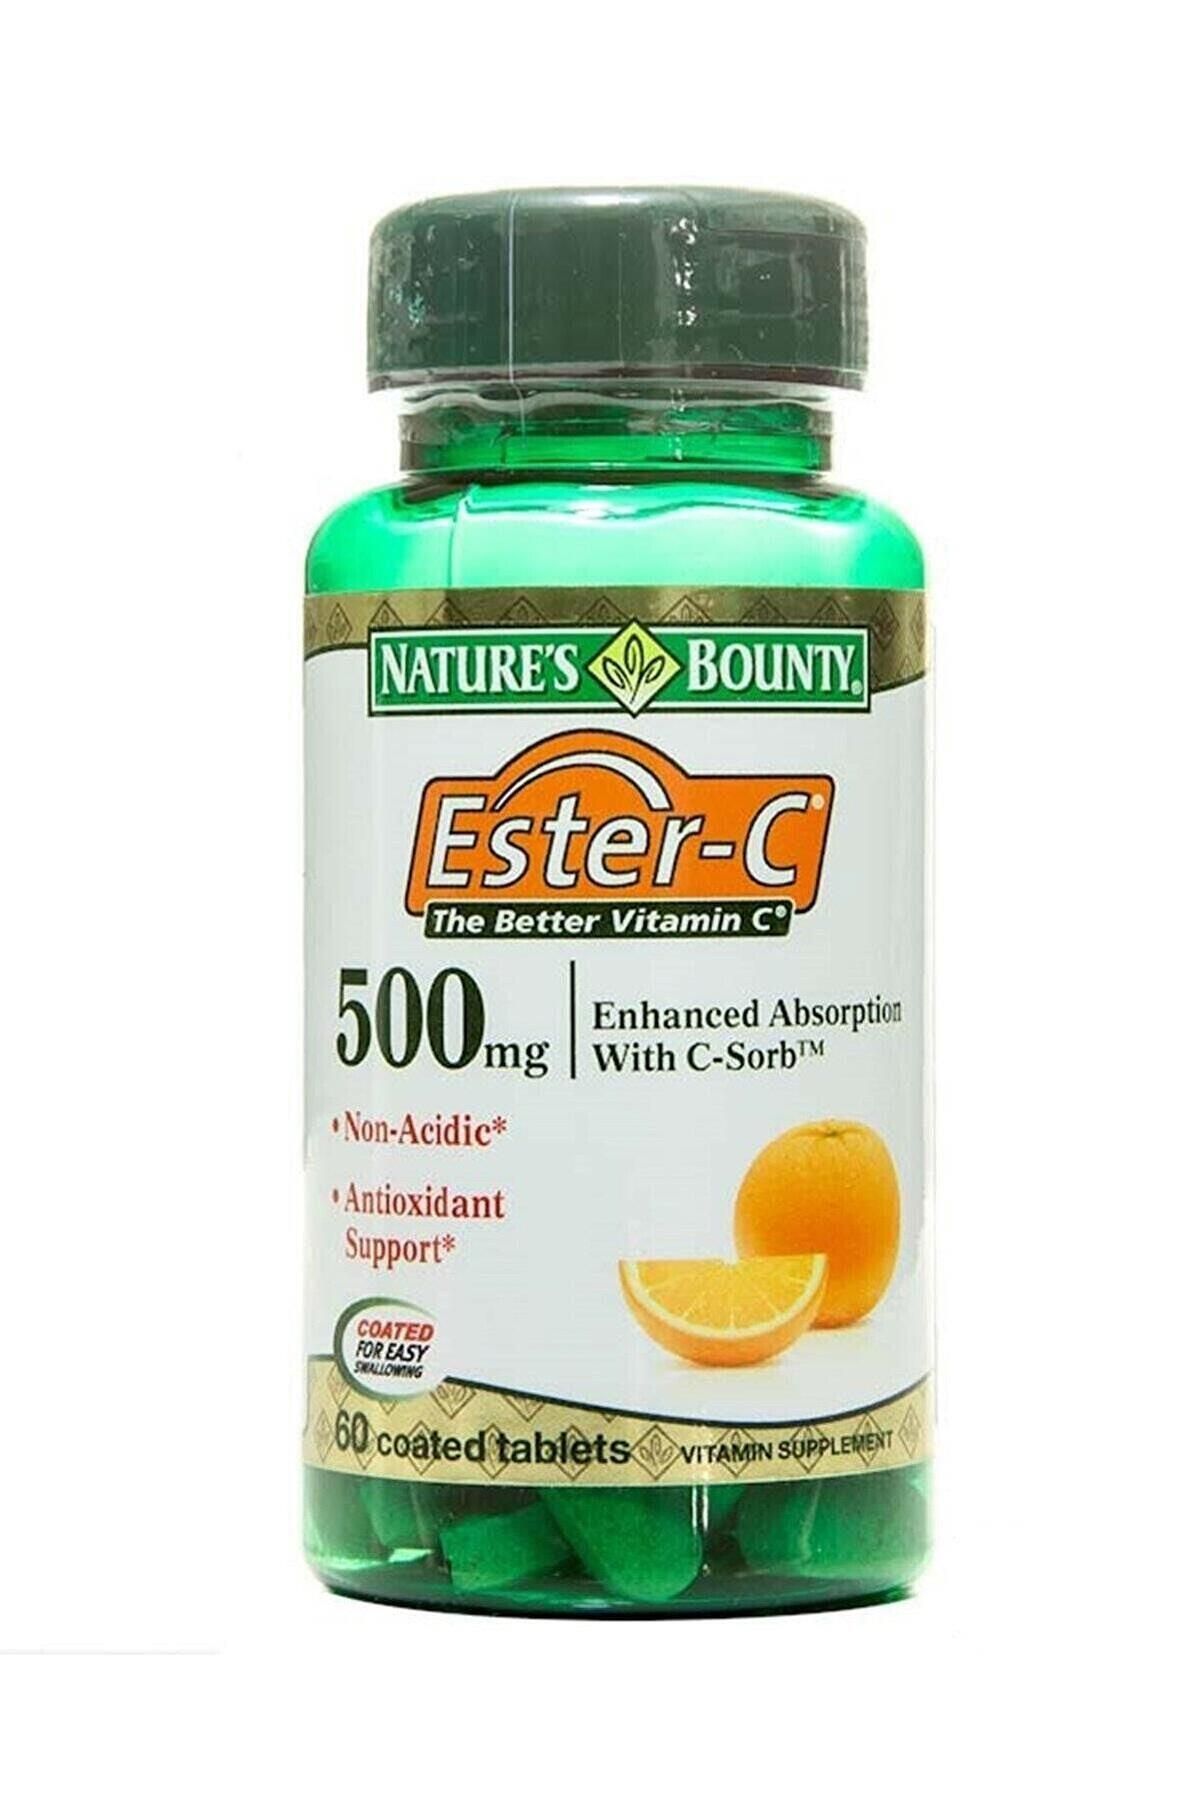 Natures Bounty Ester-c 500 Mg 60 Tablet